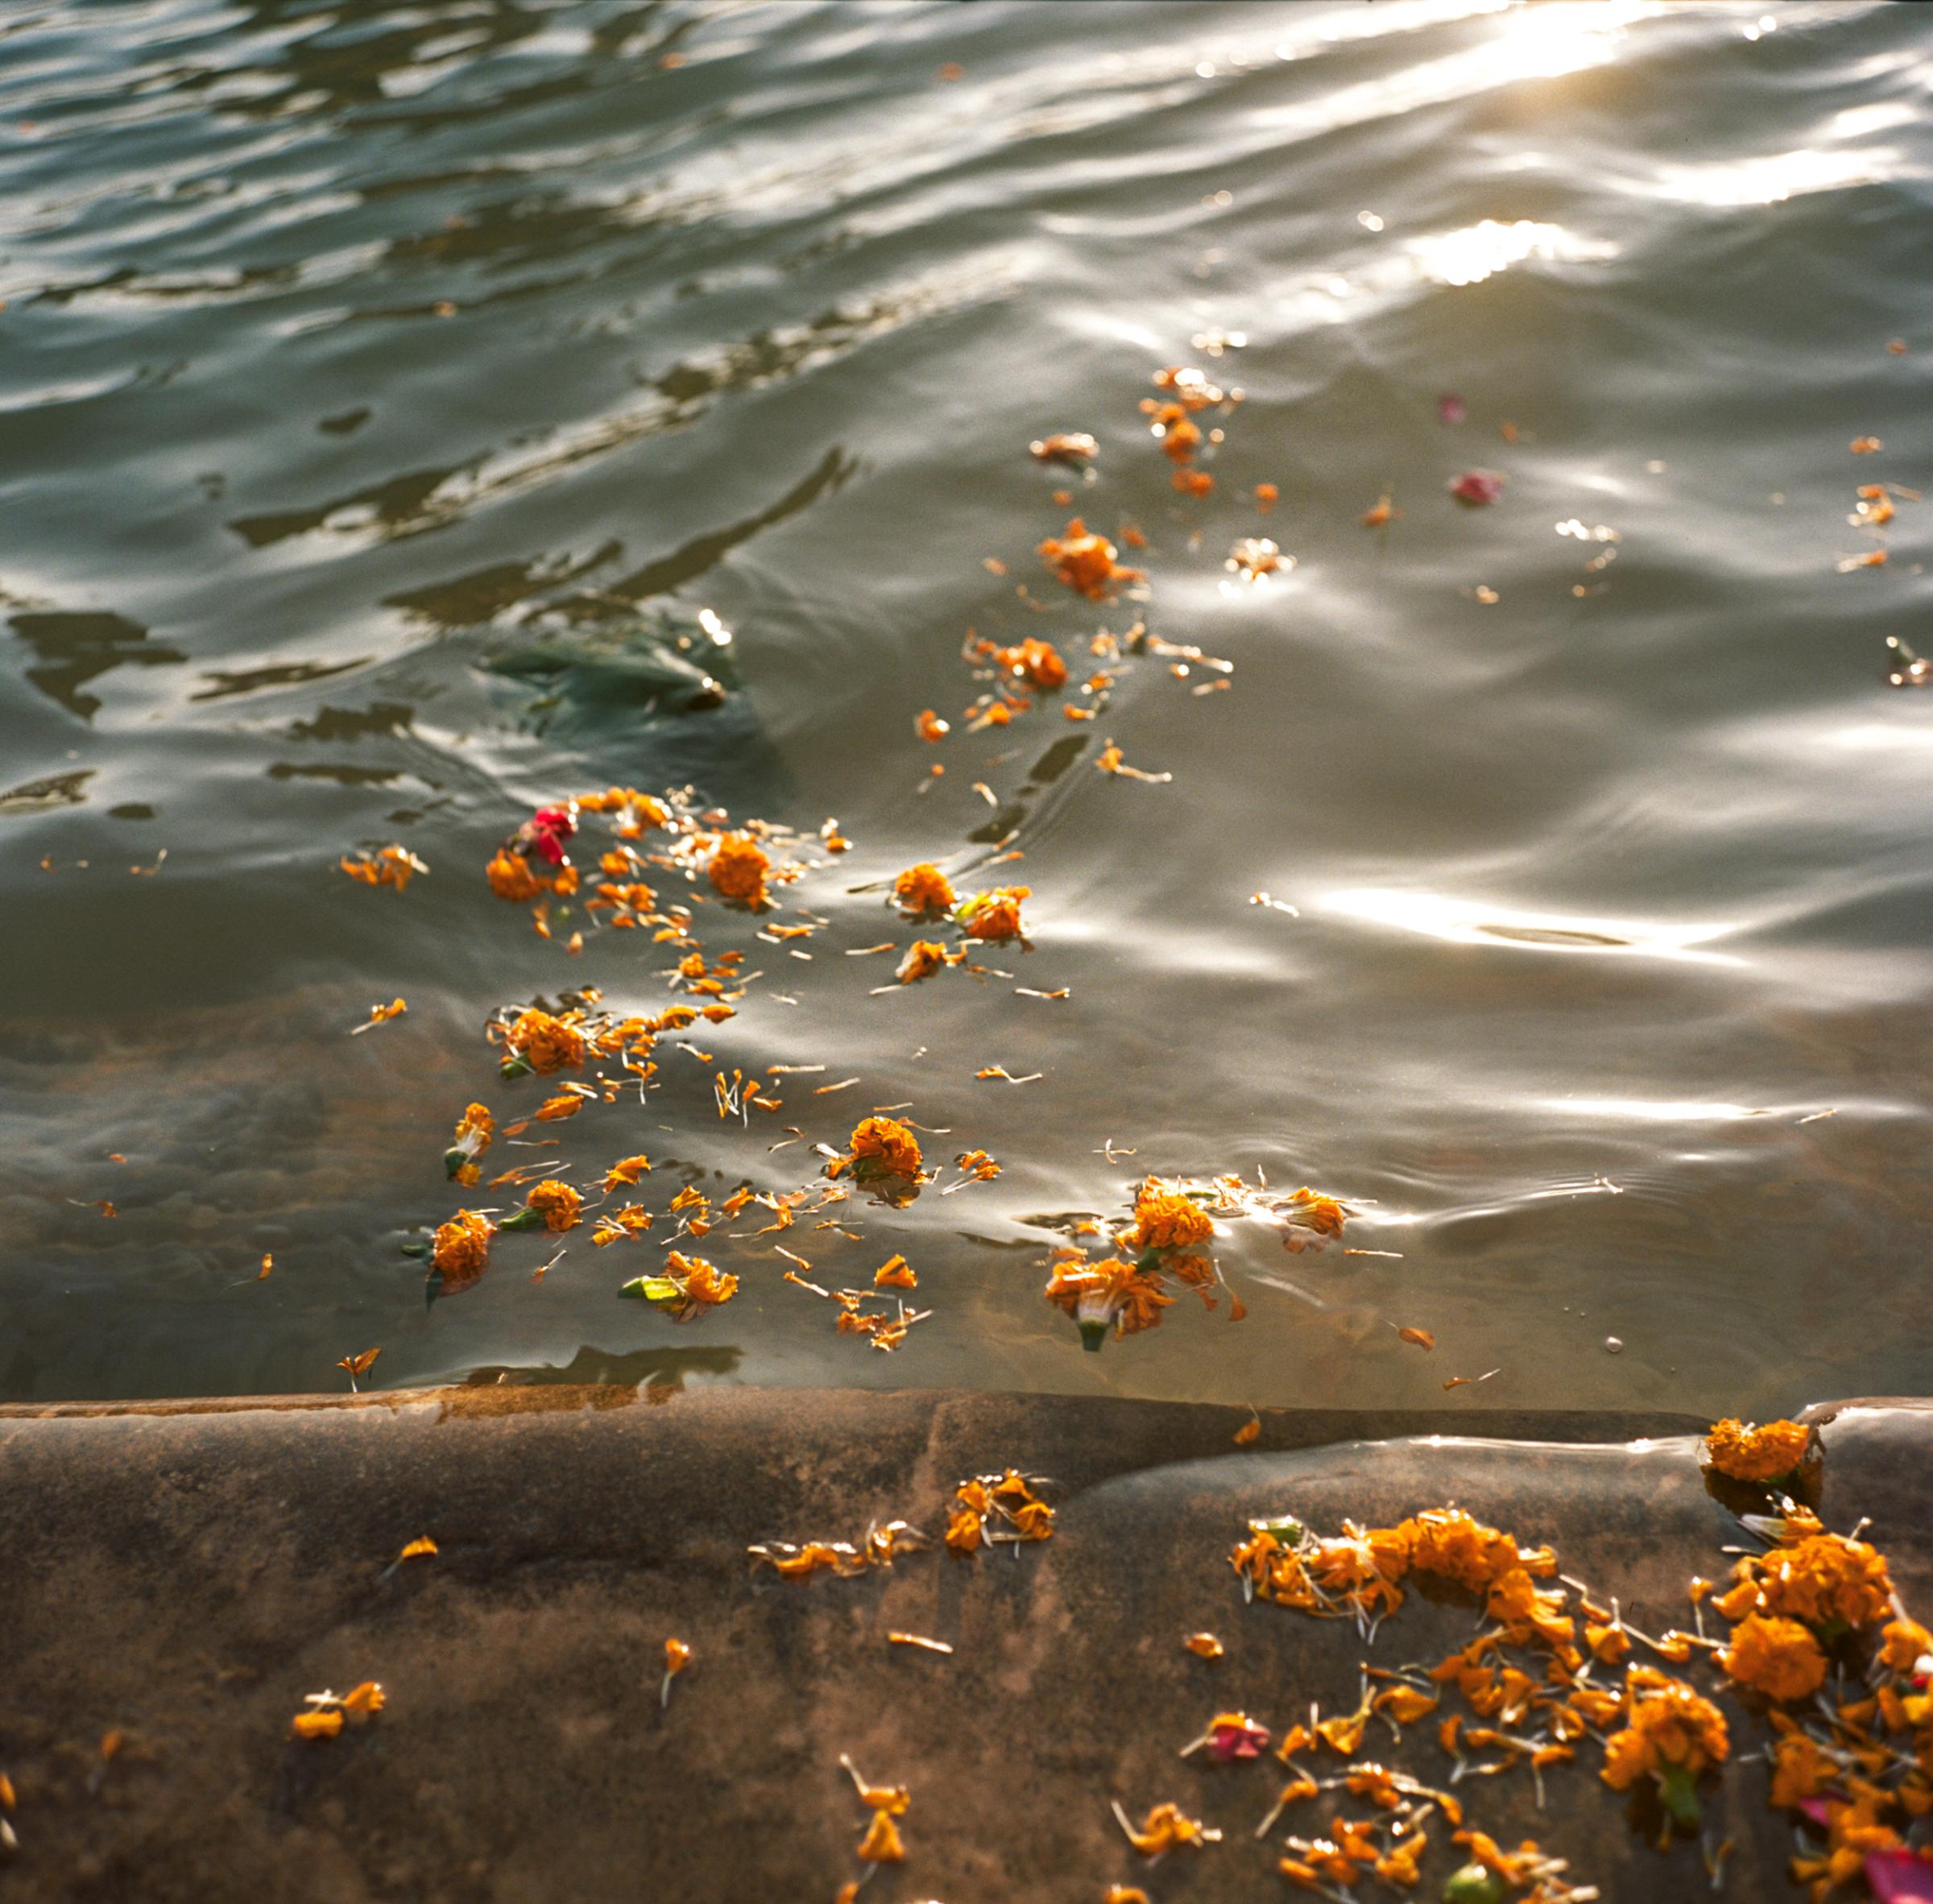 Plastic's Threat to Life Along the Ganges River - Flowers are offered to the river at Har Ki Pauri ghat in...